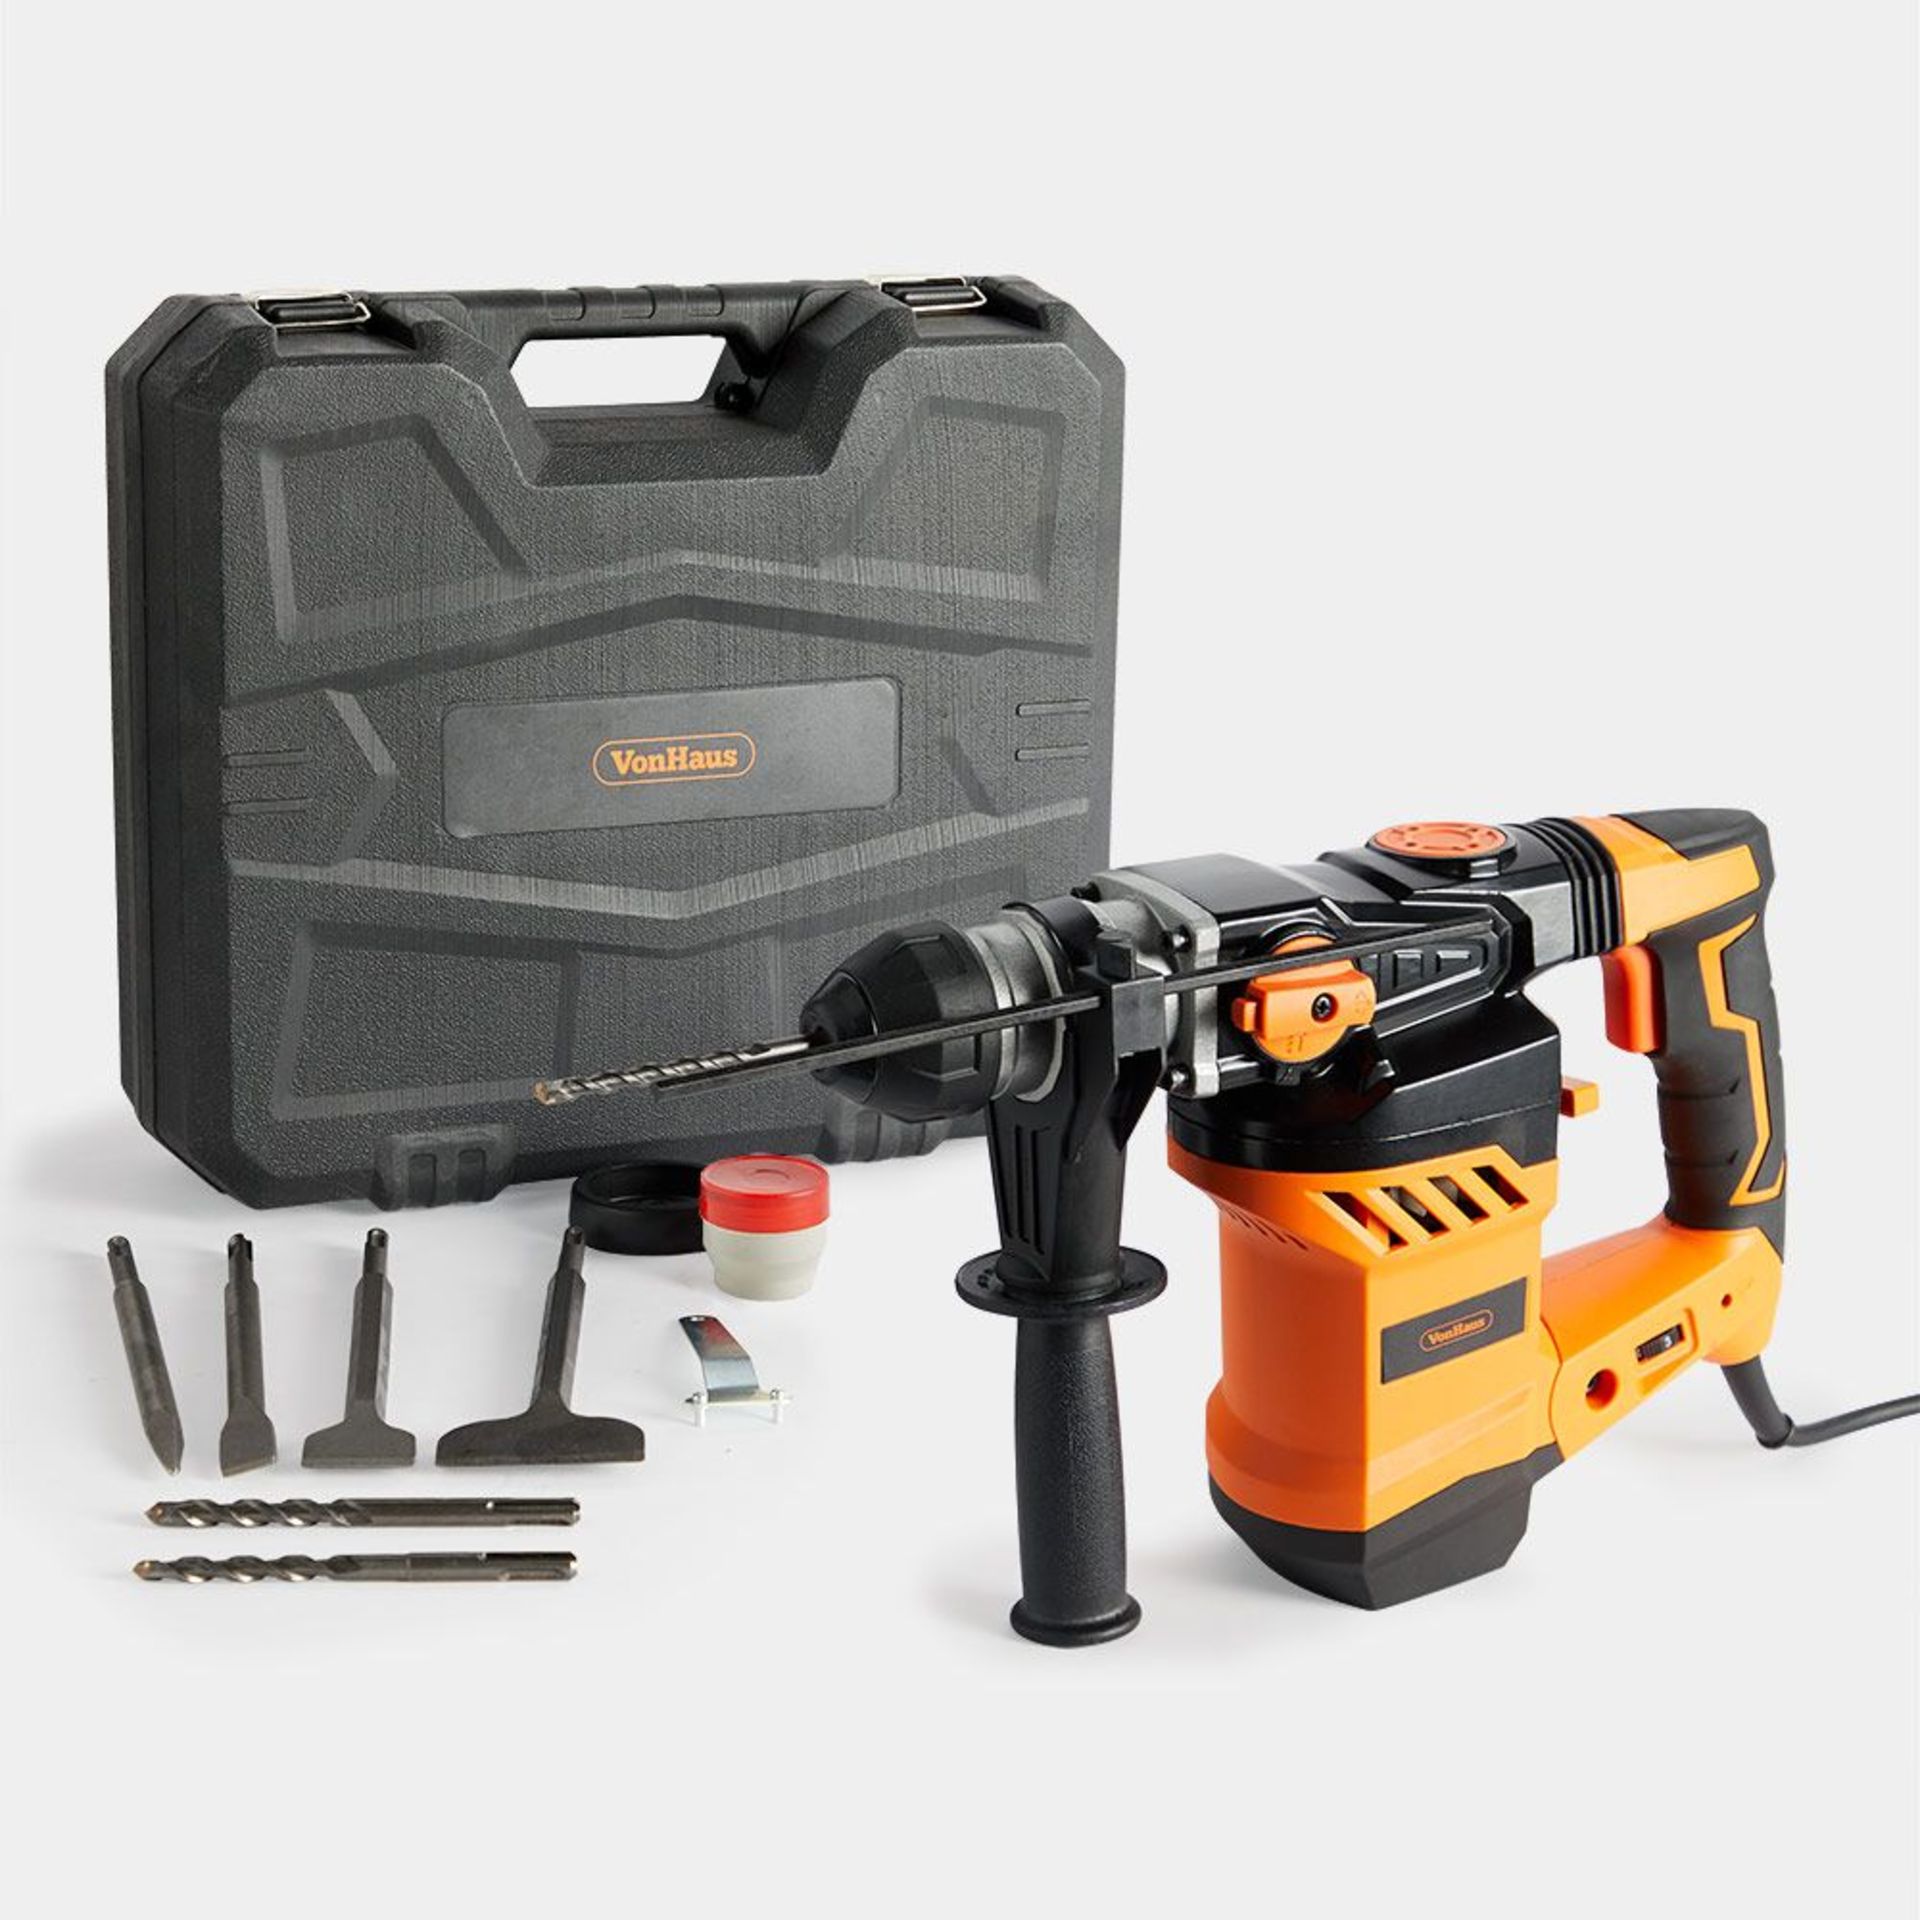 SDS Plus Drill. - R8. Perfect for tough tasks, such as demolishing brickwork, removing plaster,